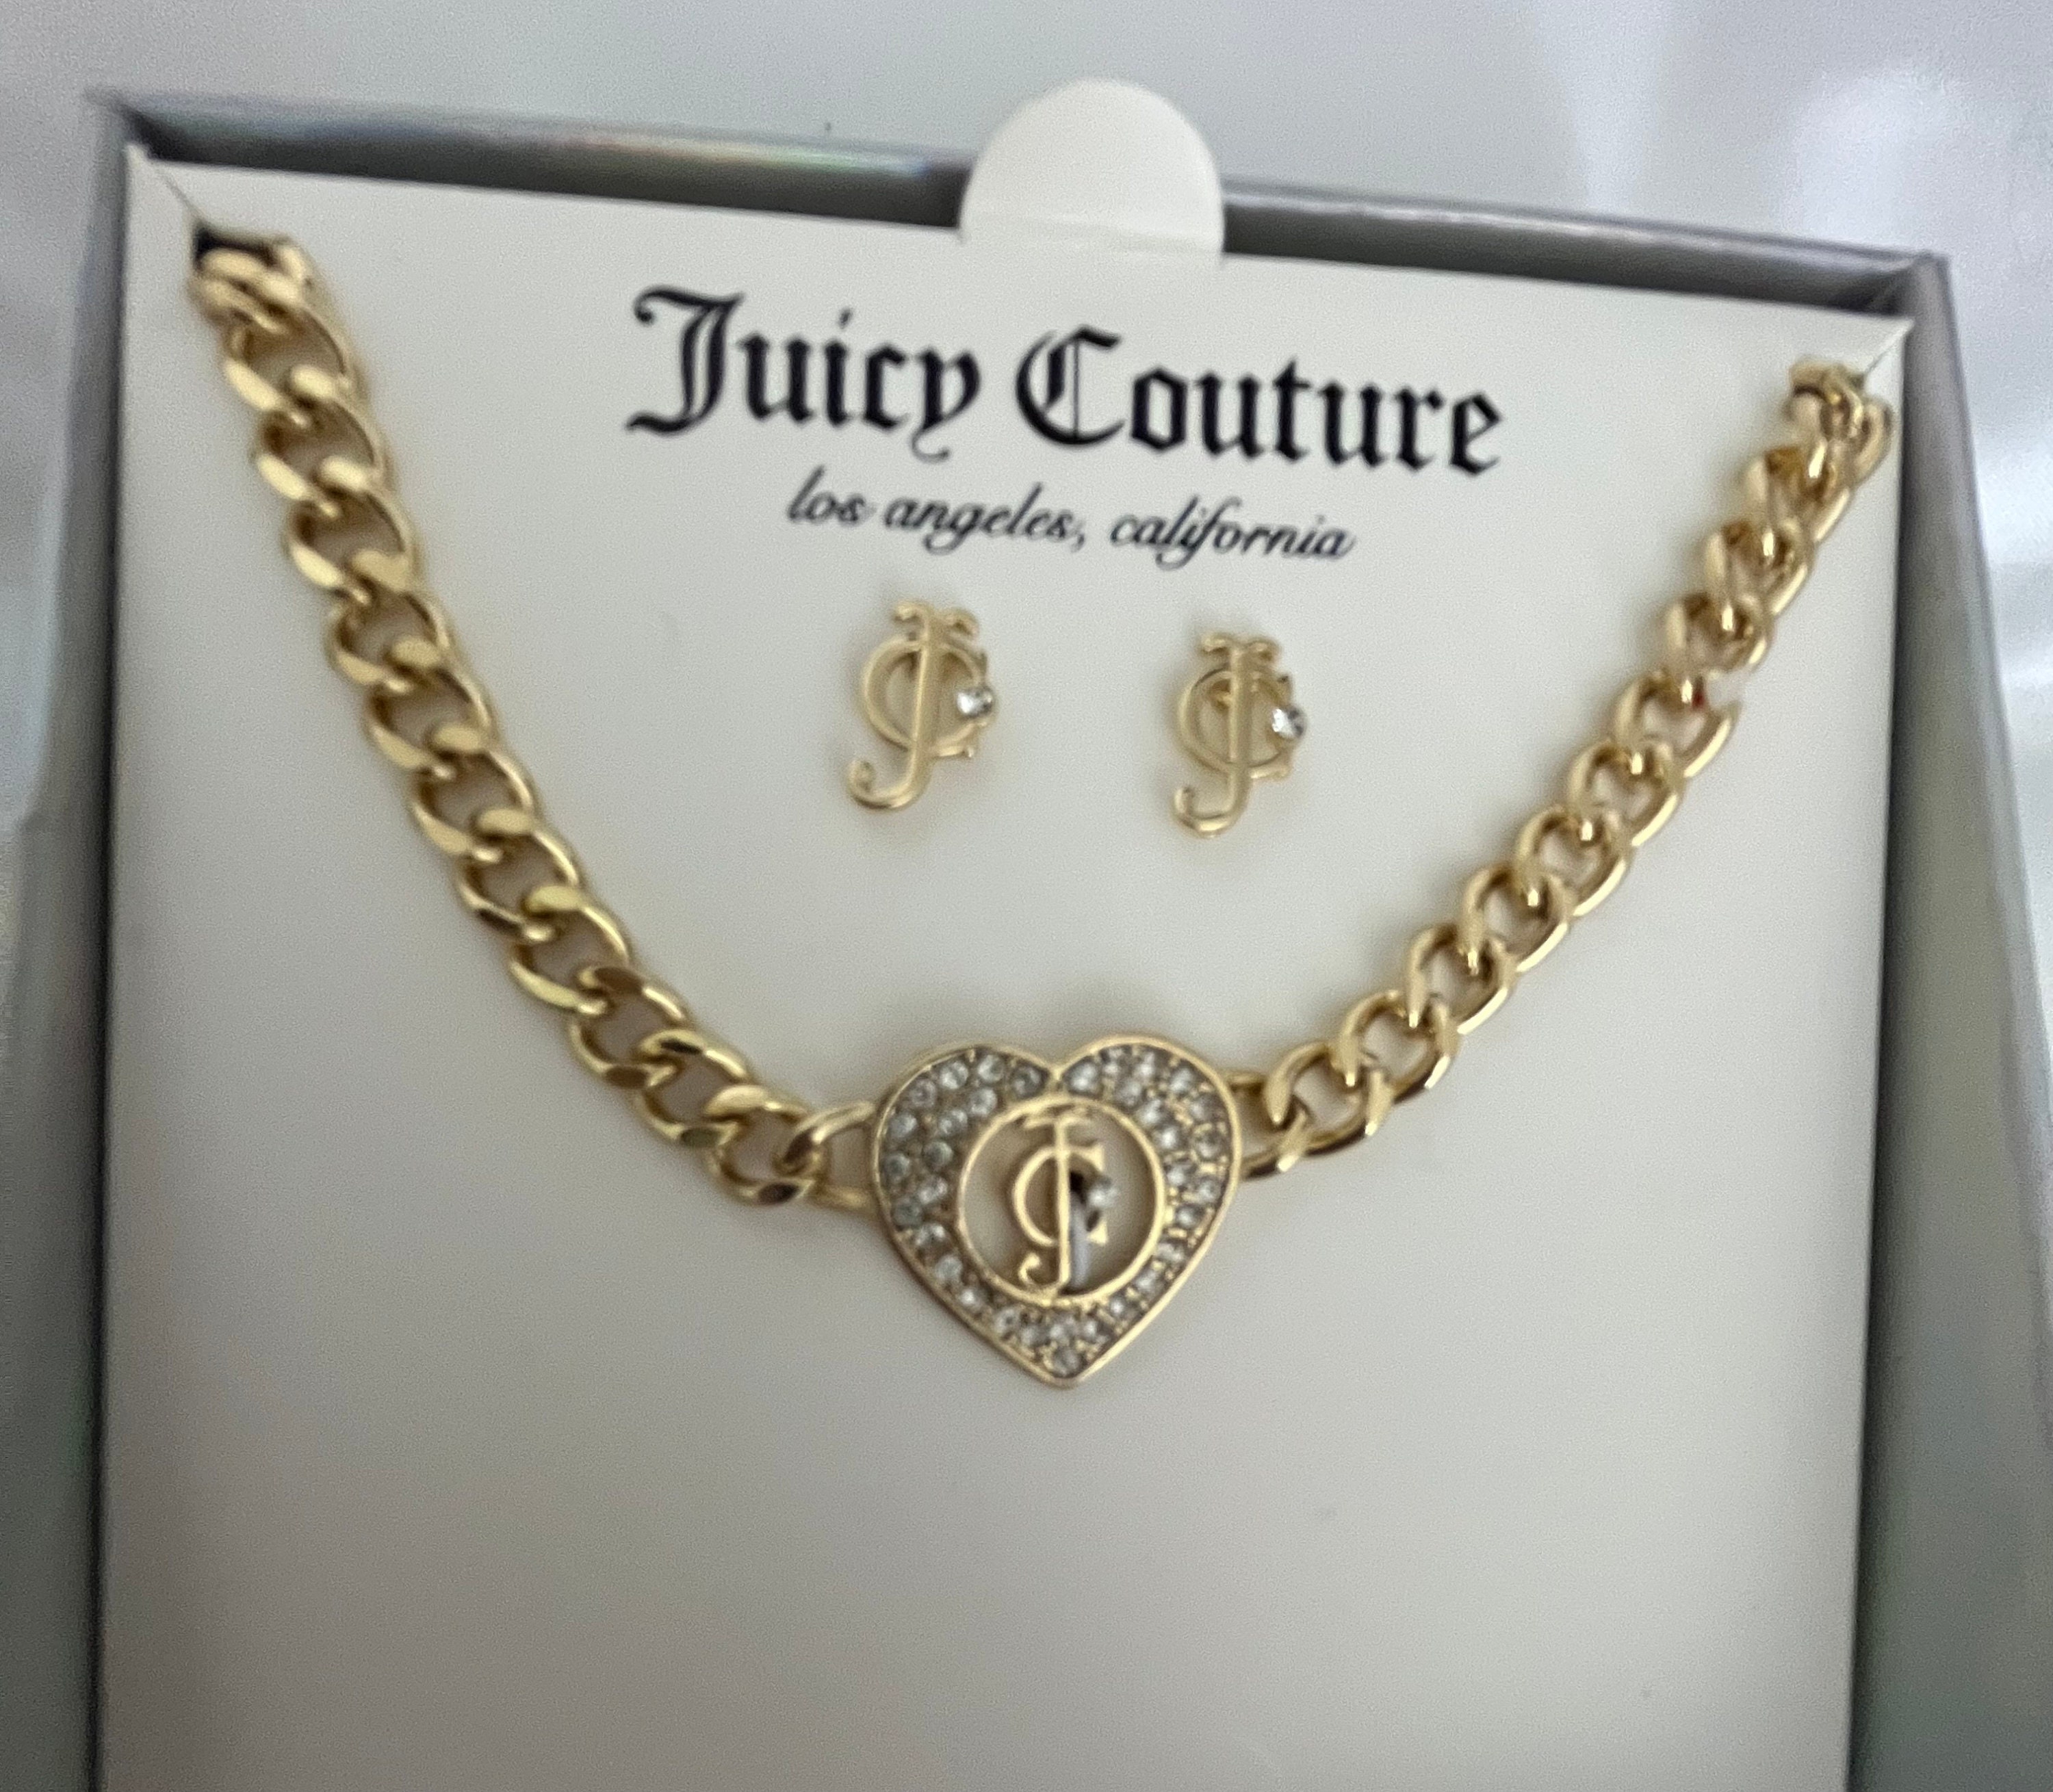 Juicycostumejewelry Juicy Couture Necklace and Earrings Set